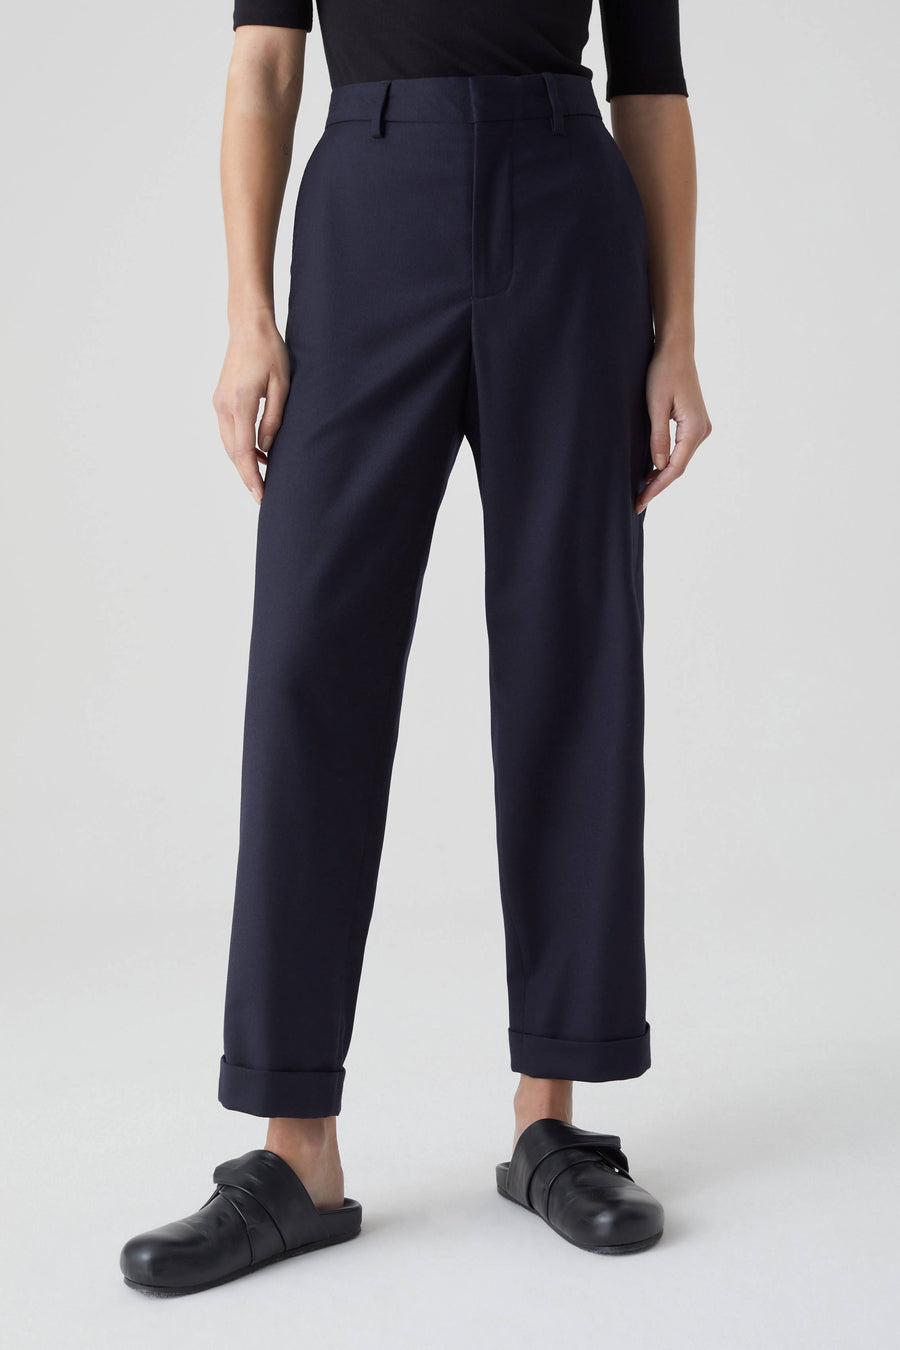 Closed Auckley Pants - Navy